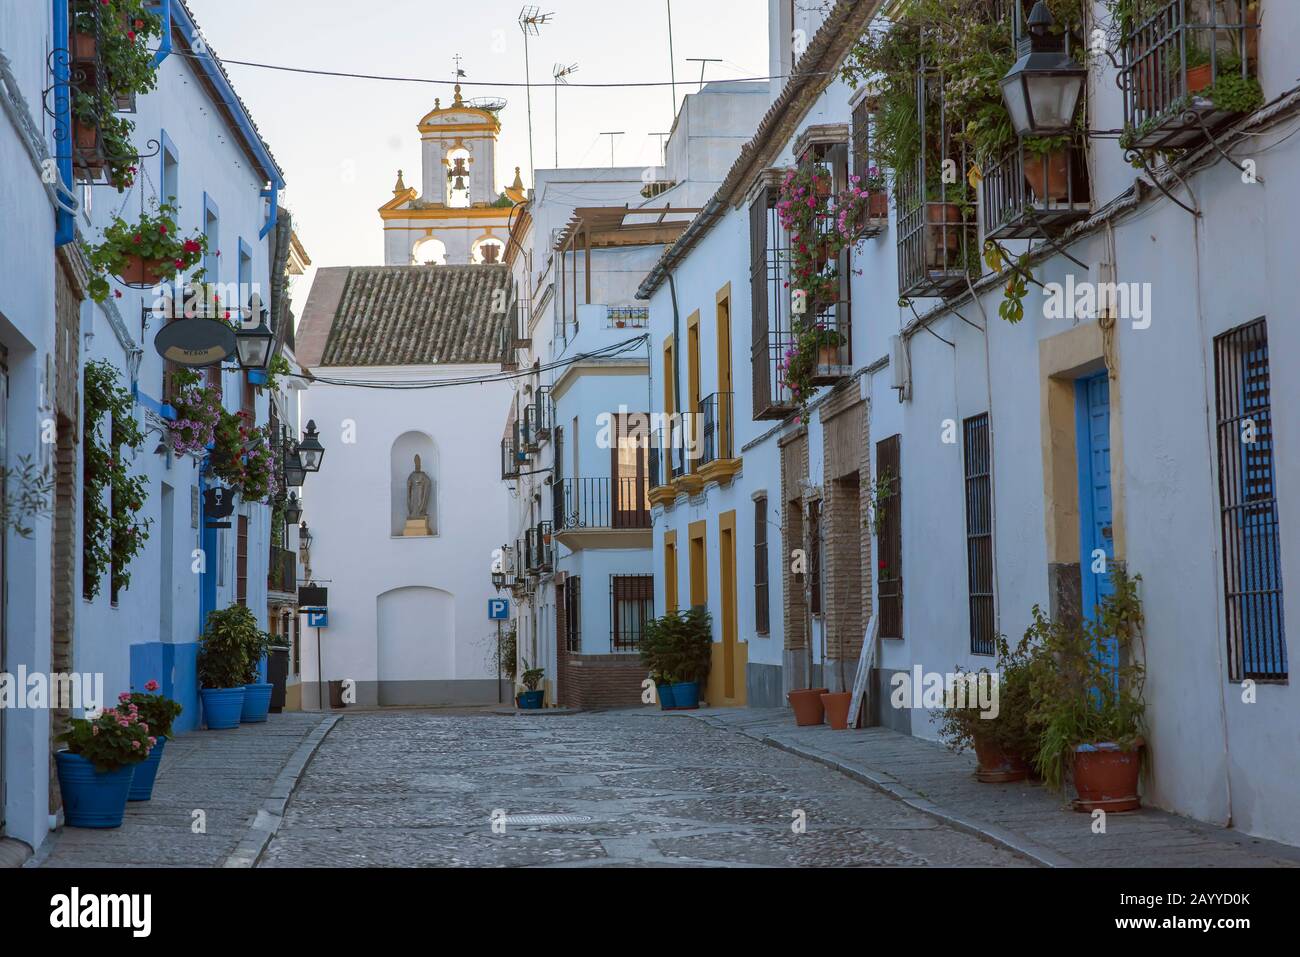 Cordoba city street with colorful pots and a church in the background Stock Photo